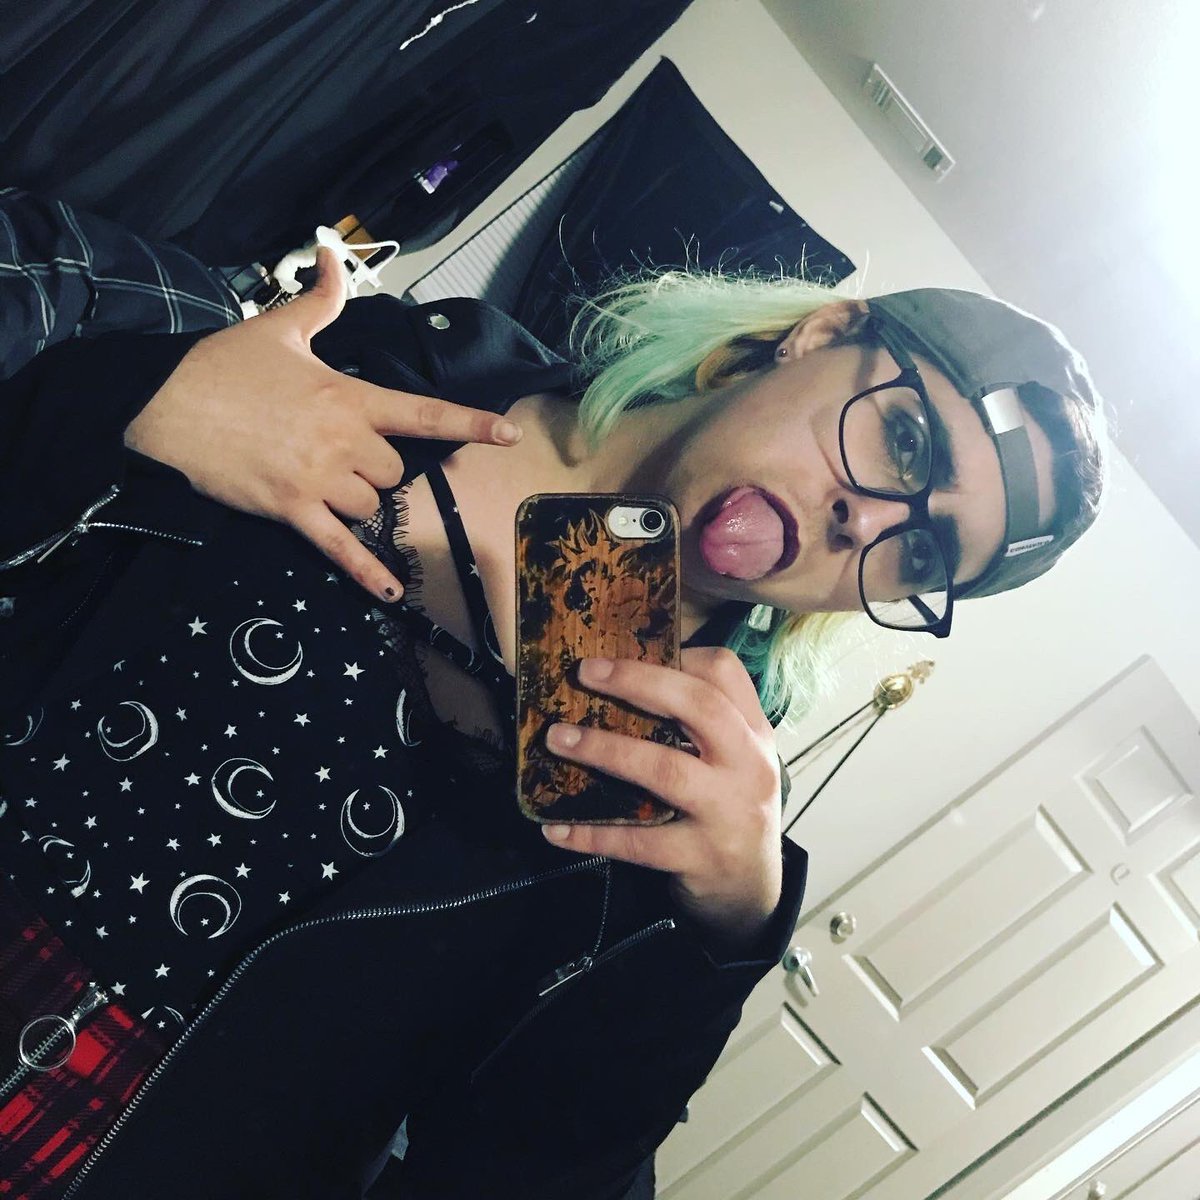 These next three are from the same look, but different vibes. I like this one because it was all “Fuck you I’m punk rock” and my tongue is on full display. It was just a fun, different selfie for me than my usual.